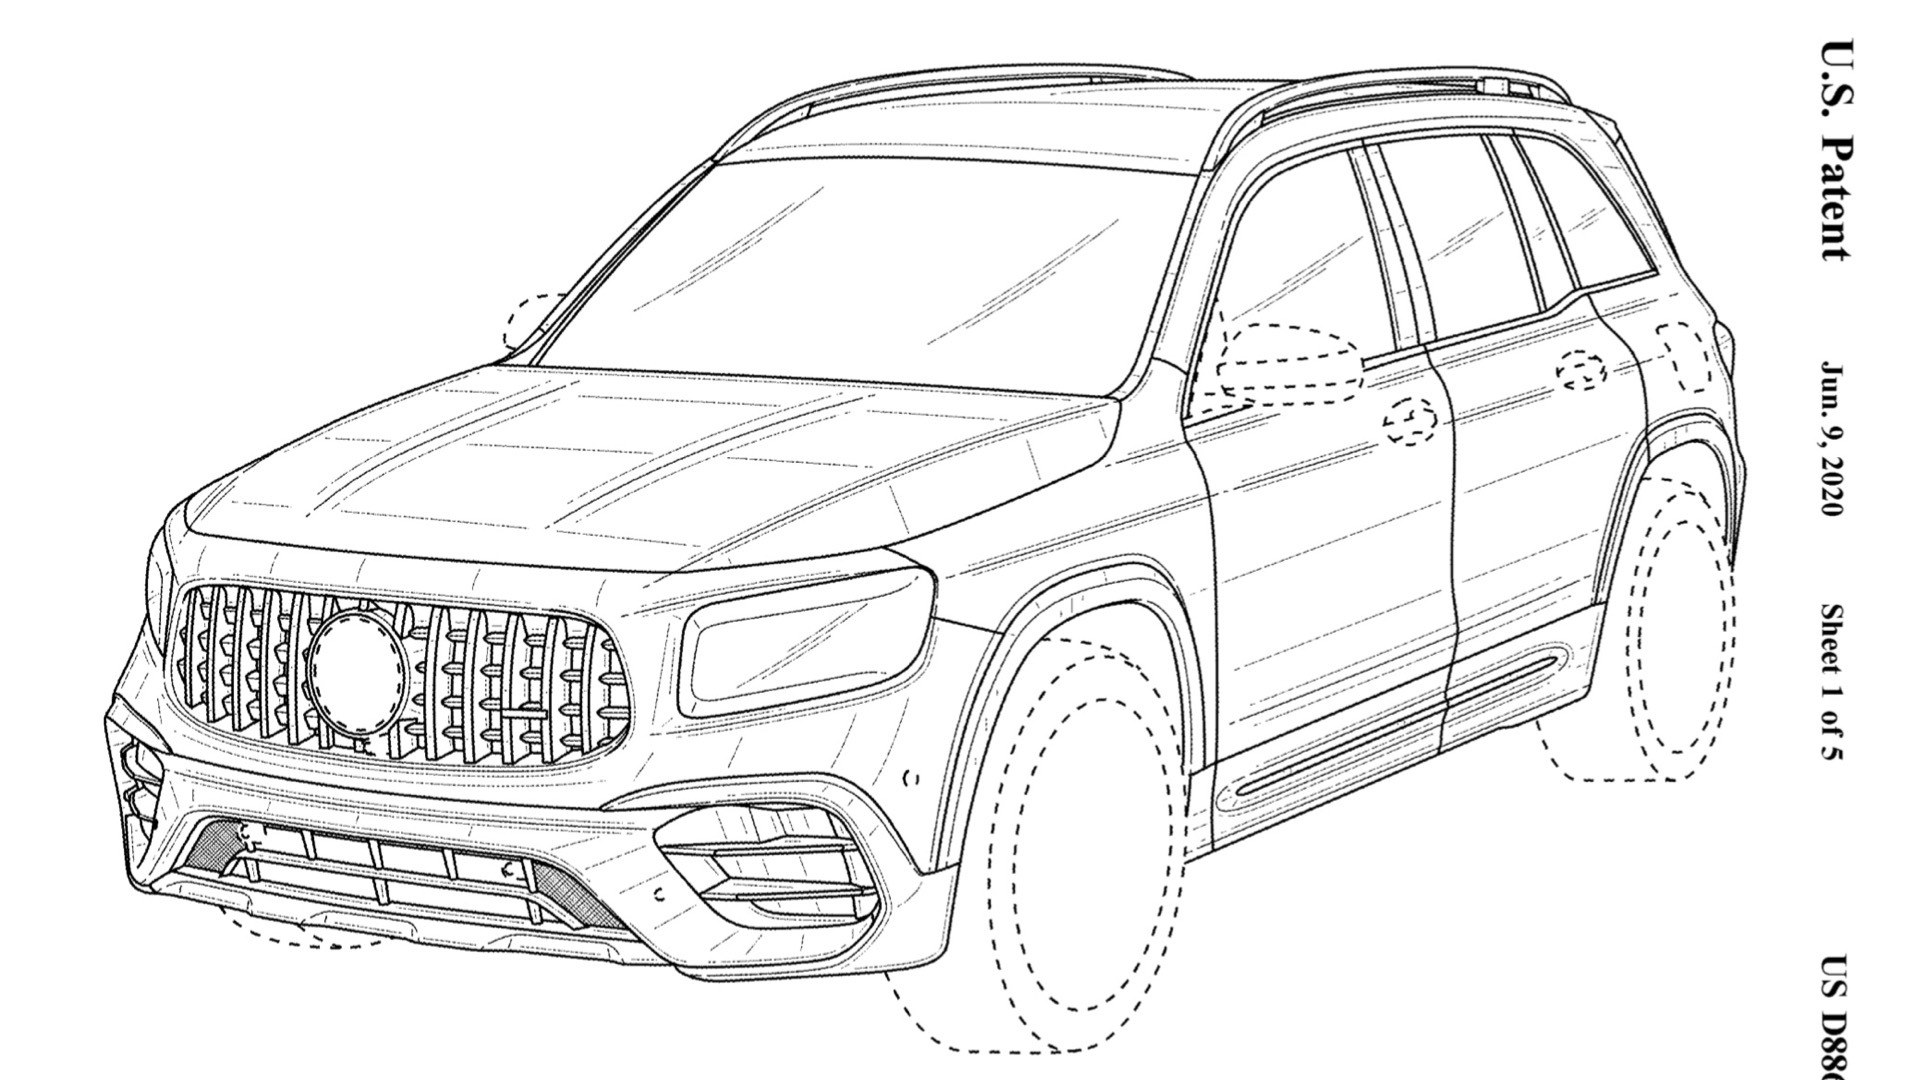 Likely 2021 Mercedes-AMG GLB 45 shown in patent filing